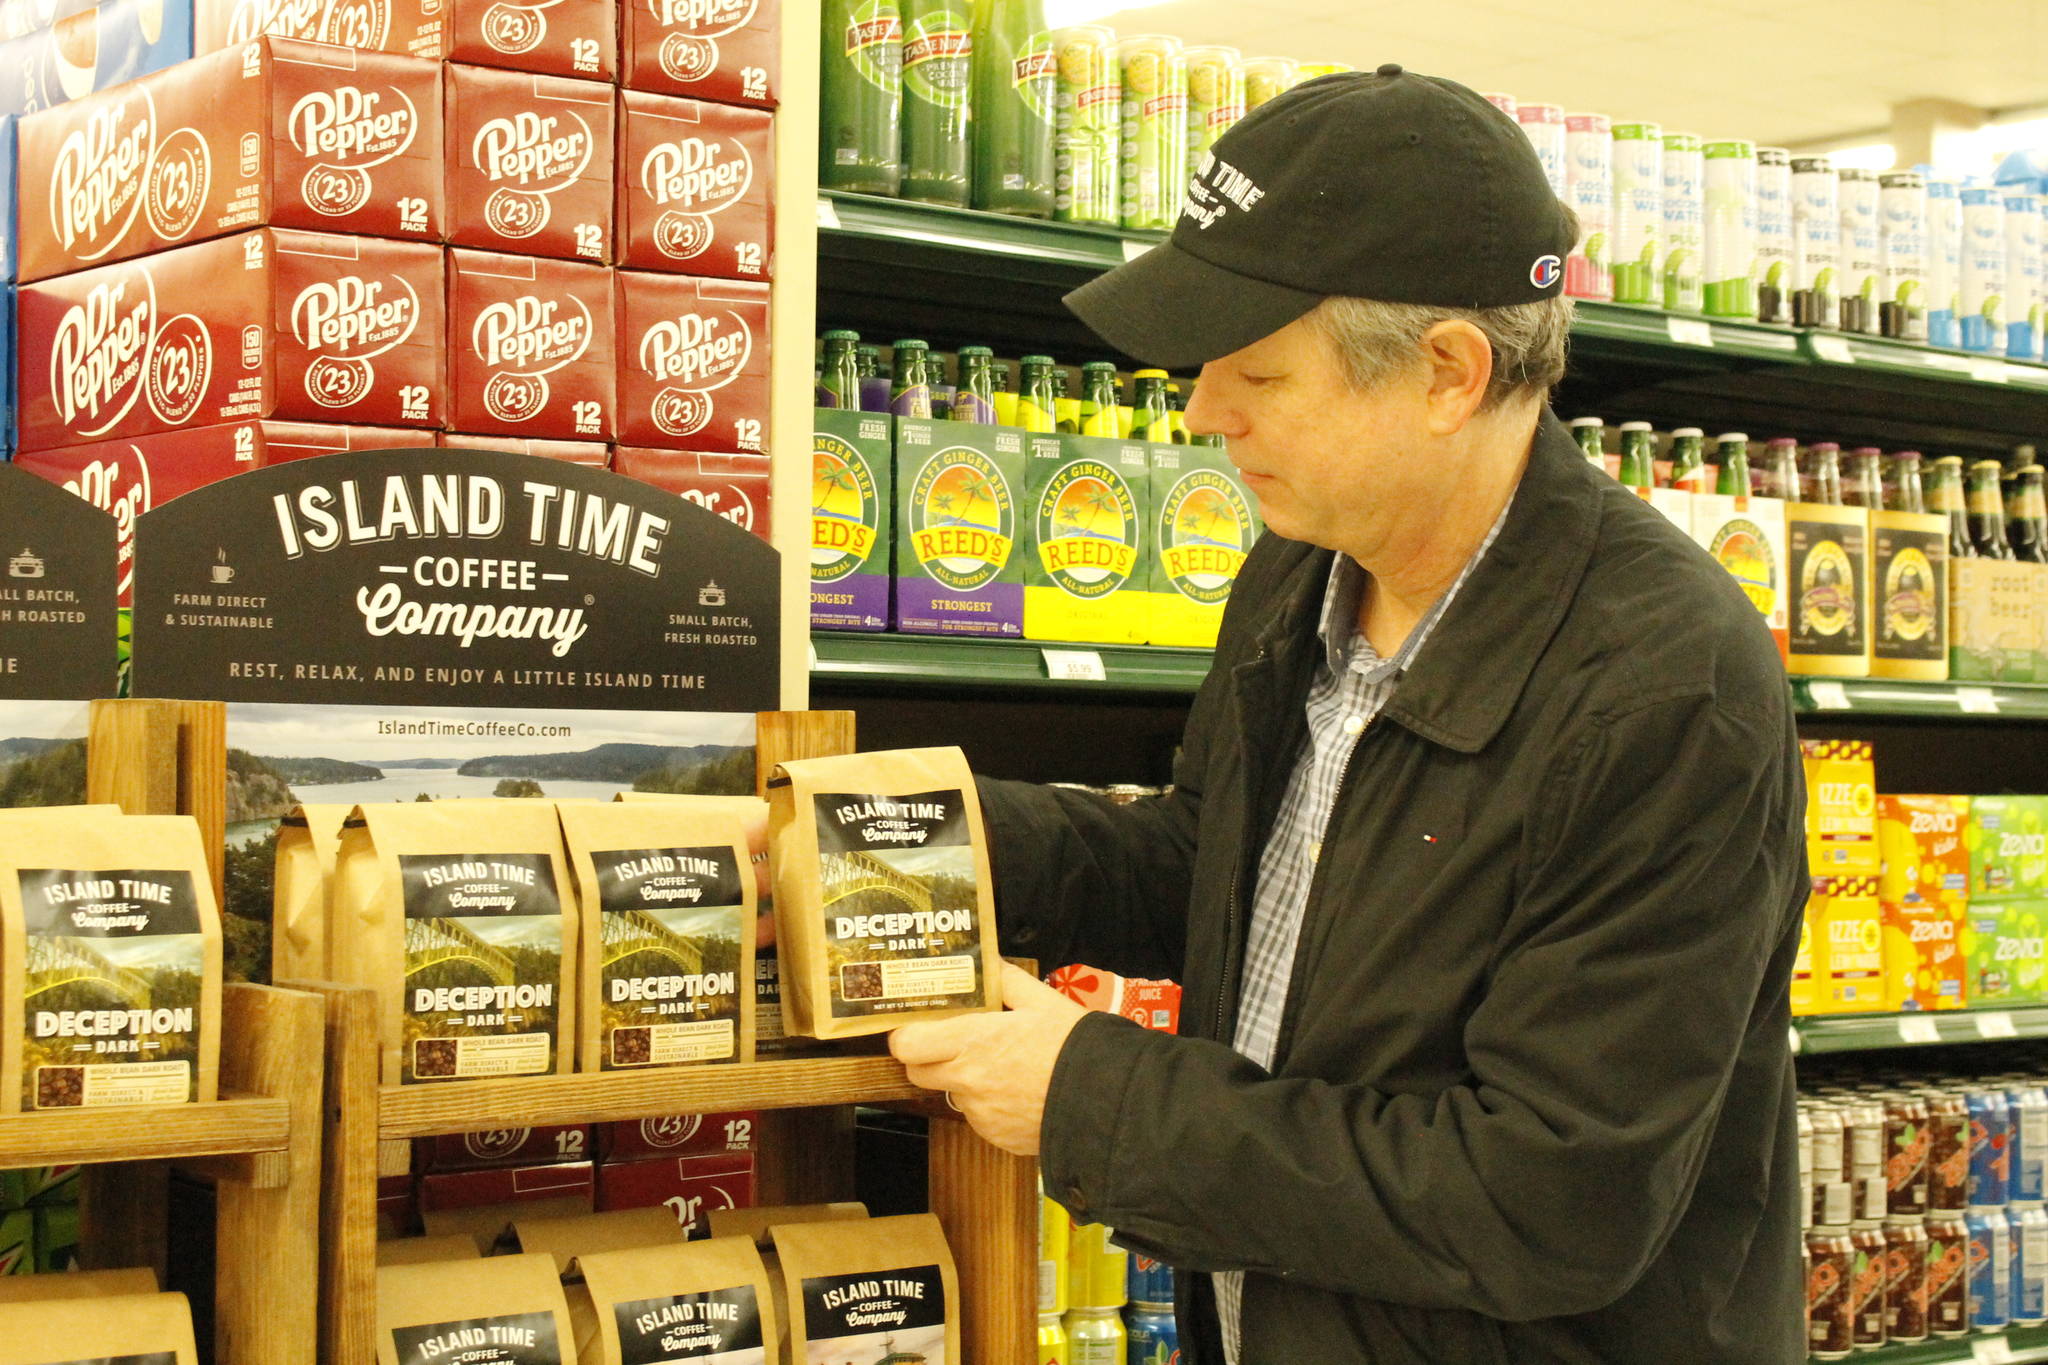 Photo by Kira Erickson/Whidbey News Group
Christopher Baldwin, owner of Island Time Coffee Company, arranges a display in Payless Foods.